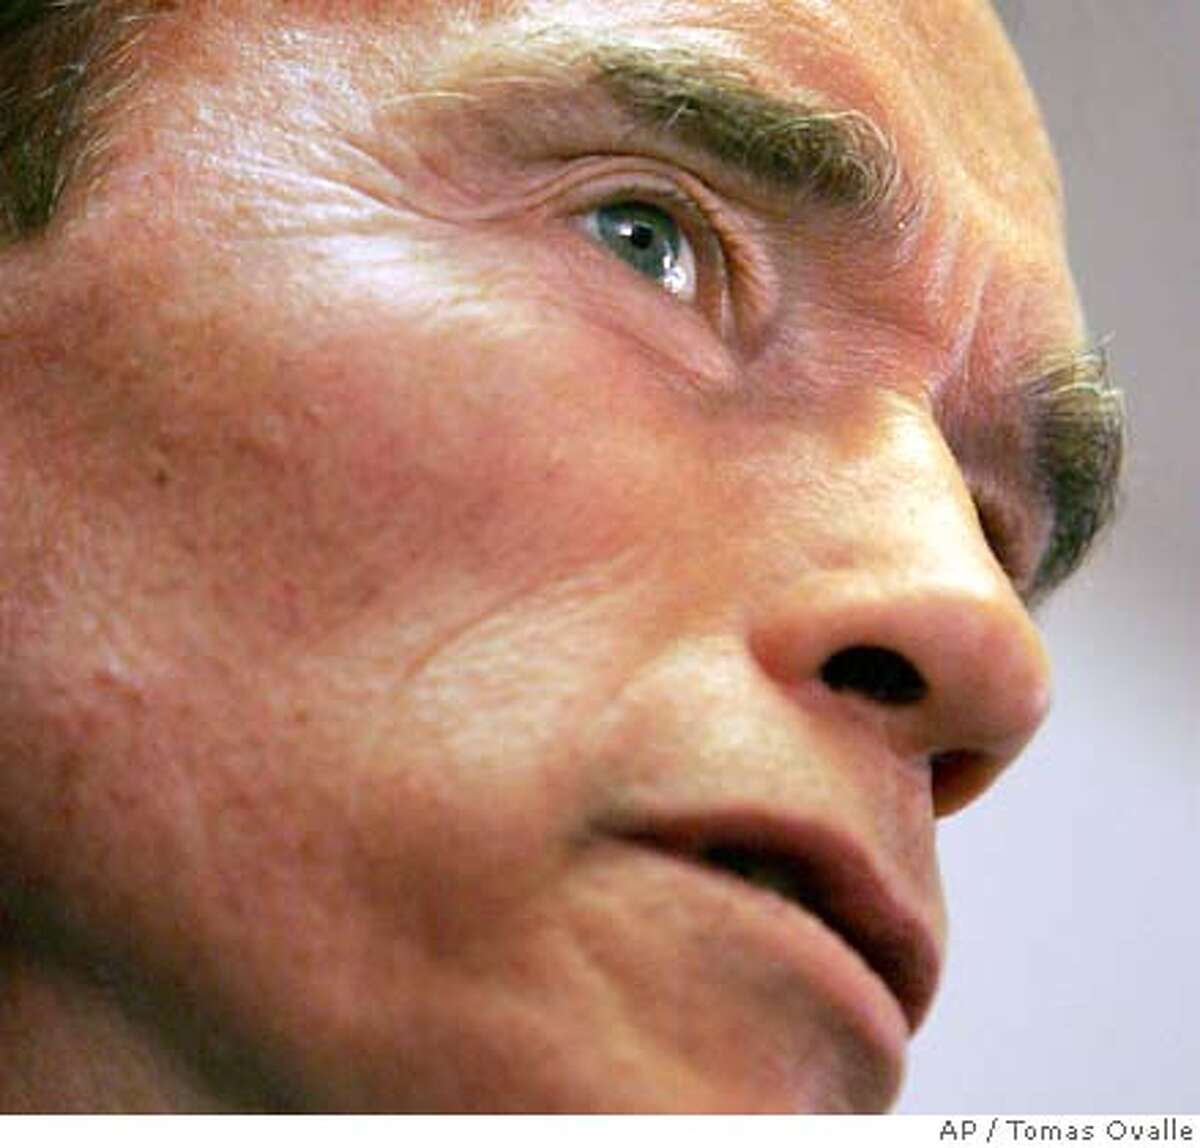 California Gov. Arnold Schwarzenegger addresses the issue of home foreclosures with a visit to Design Financial Solutions Fresno, Calif., on Tuesday, Nov. 20, 2007. The governor came to meet with industry professionals to look for solutions to the epidemic of foreclosures hitting California. (AP Photo/Tomas Ovalle/ The Fresno Bee)